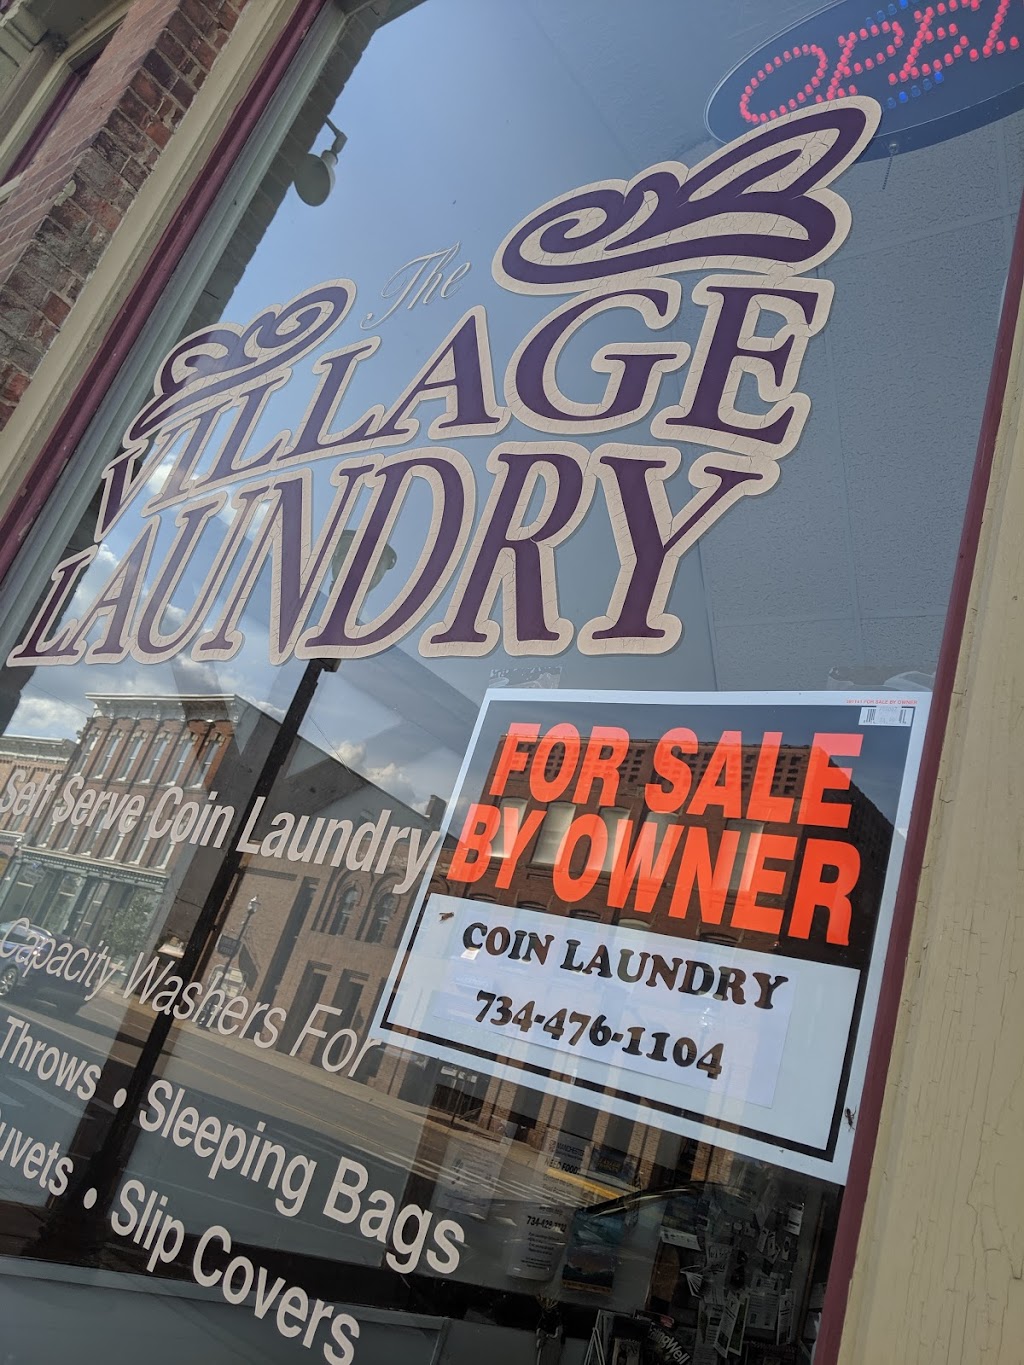 Village Laundry And Embroidery | 144 E Main St, Manchester, MI 48158 | Phone: (734) 428-8177